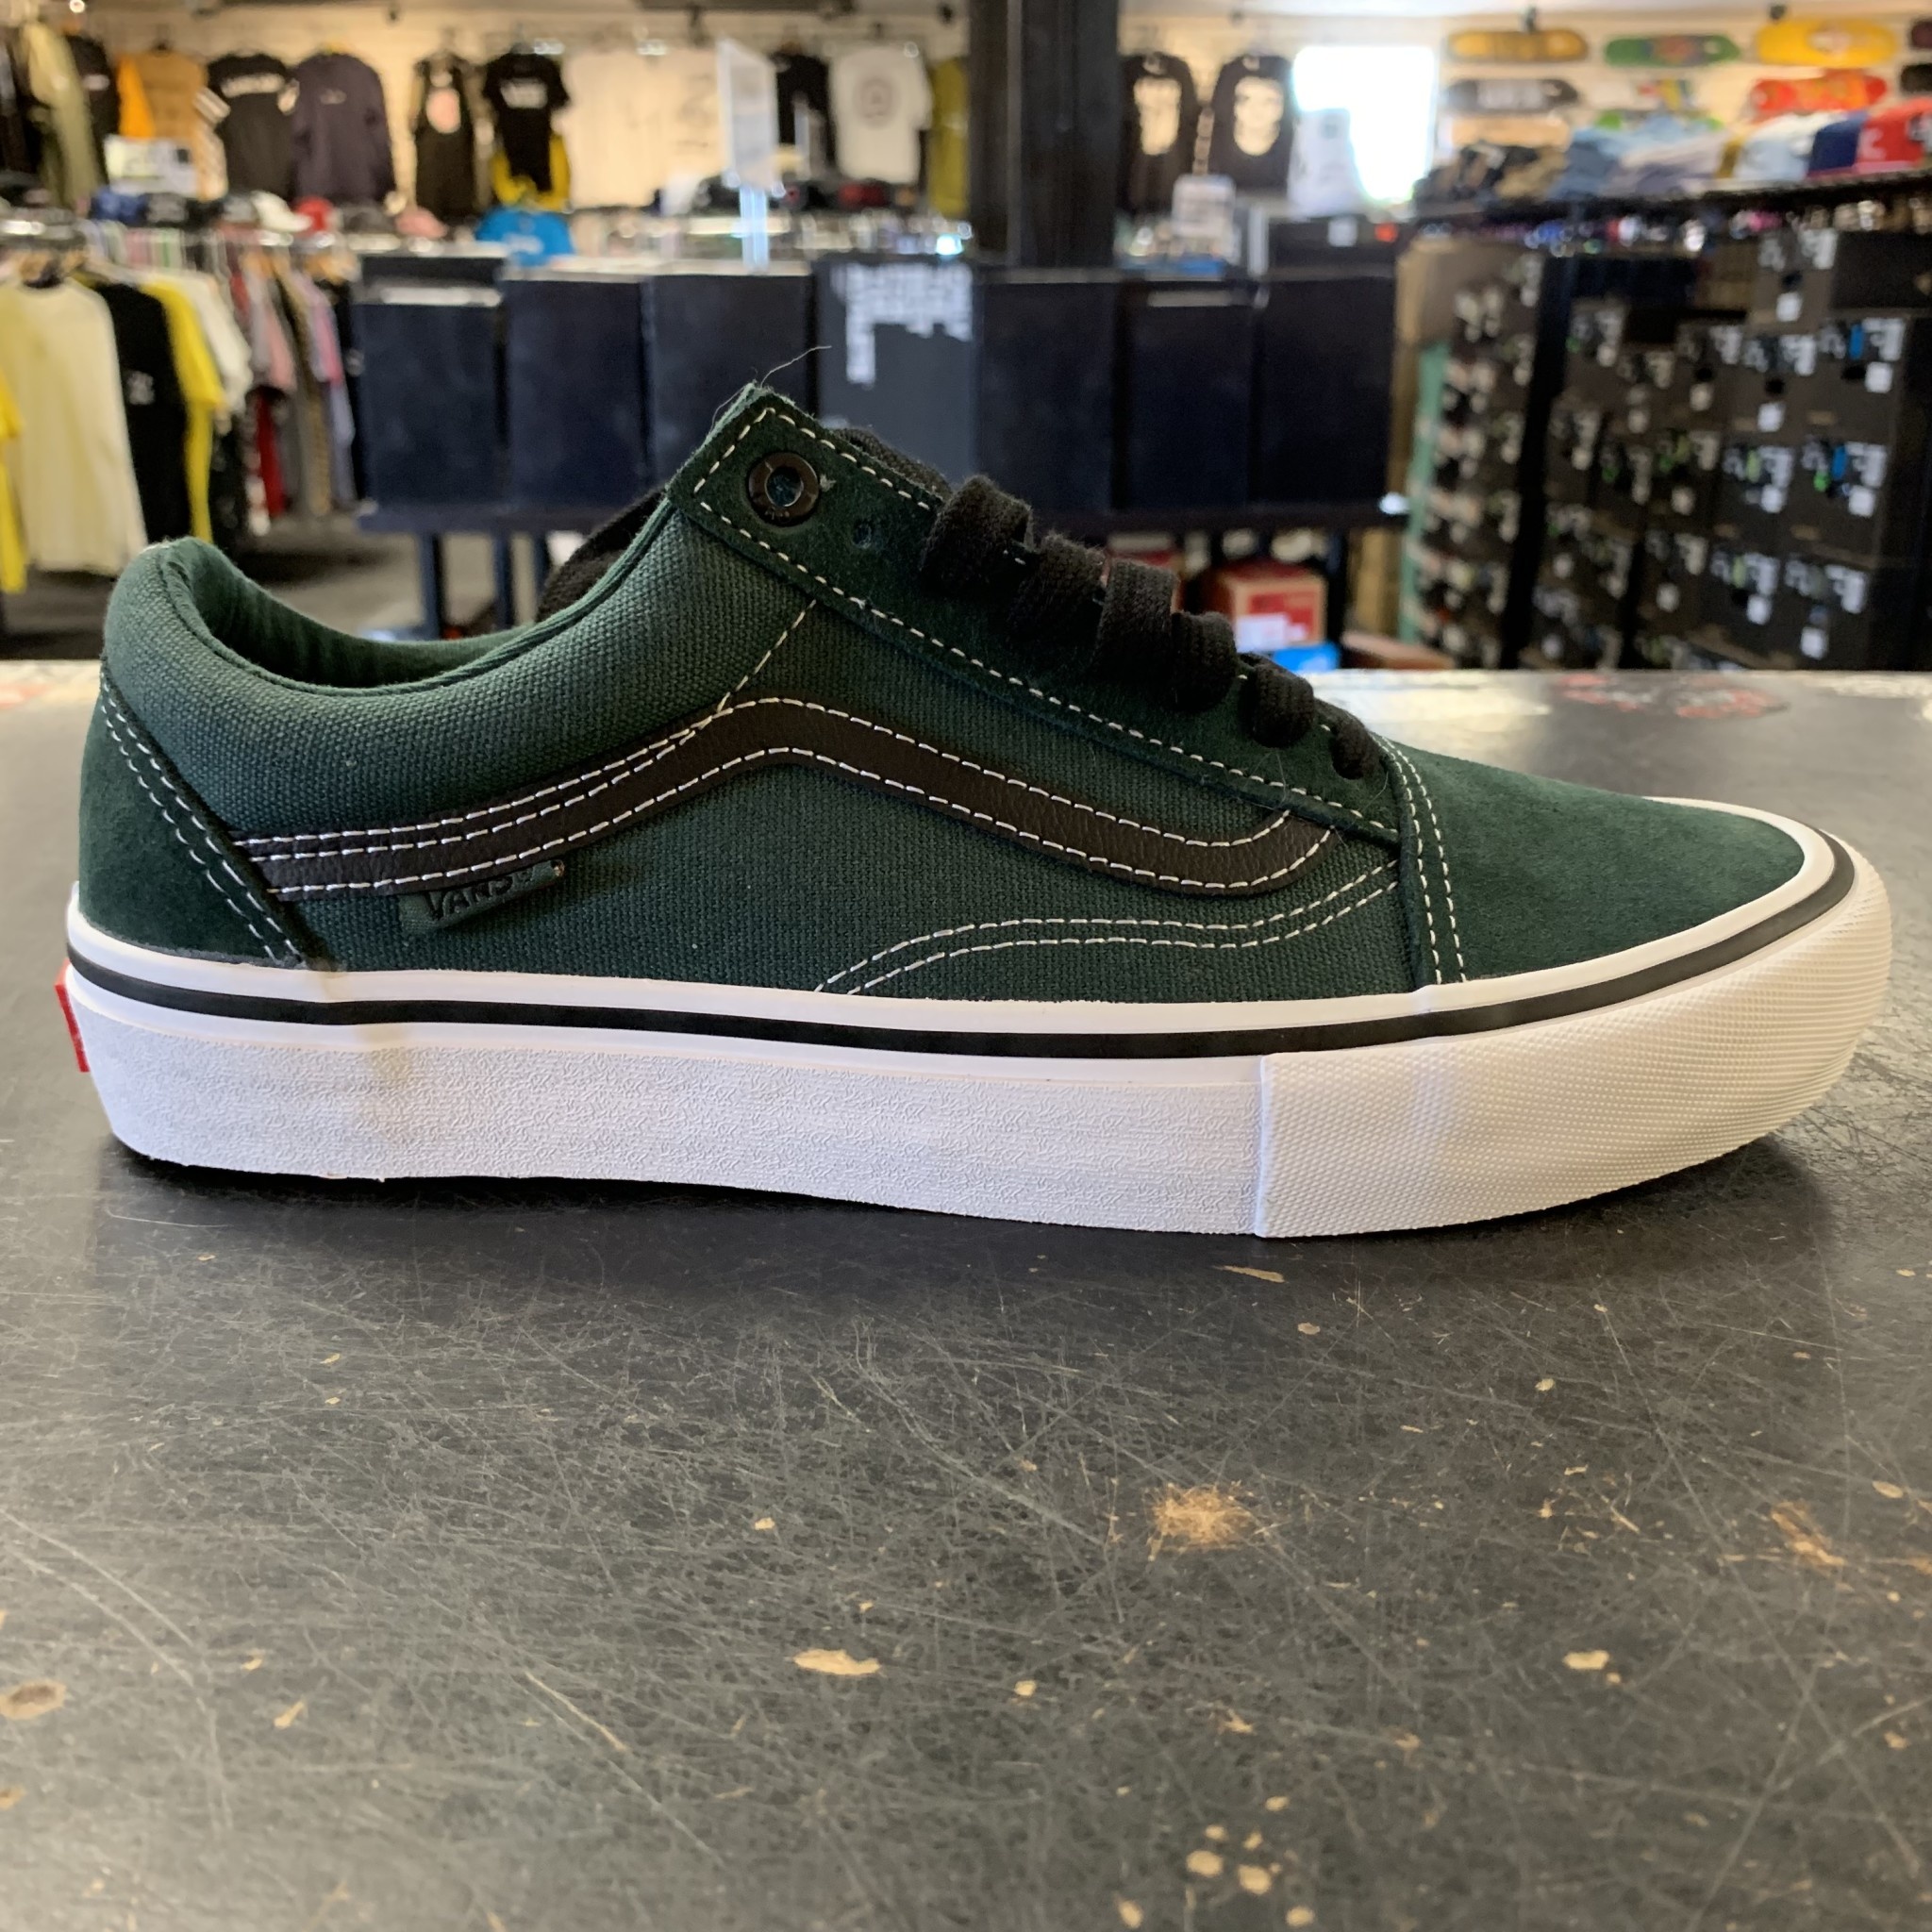 vans shoes green and black